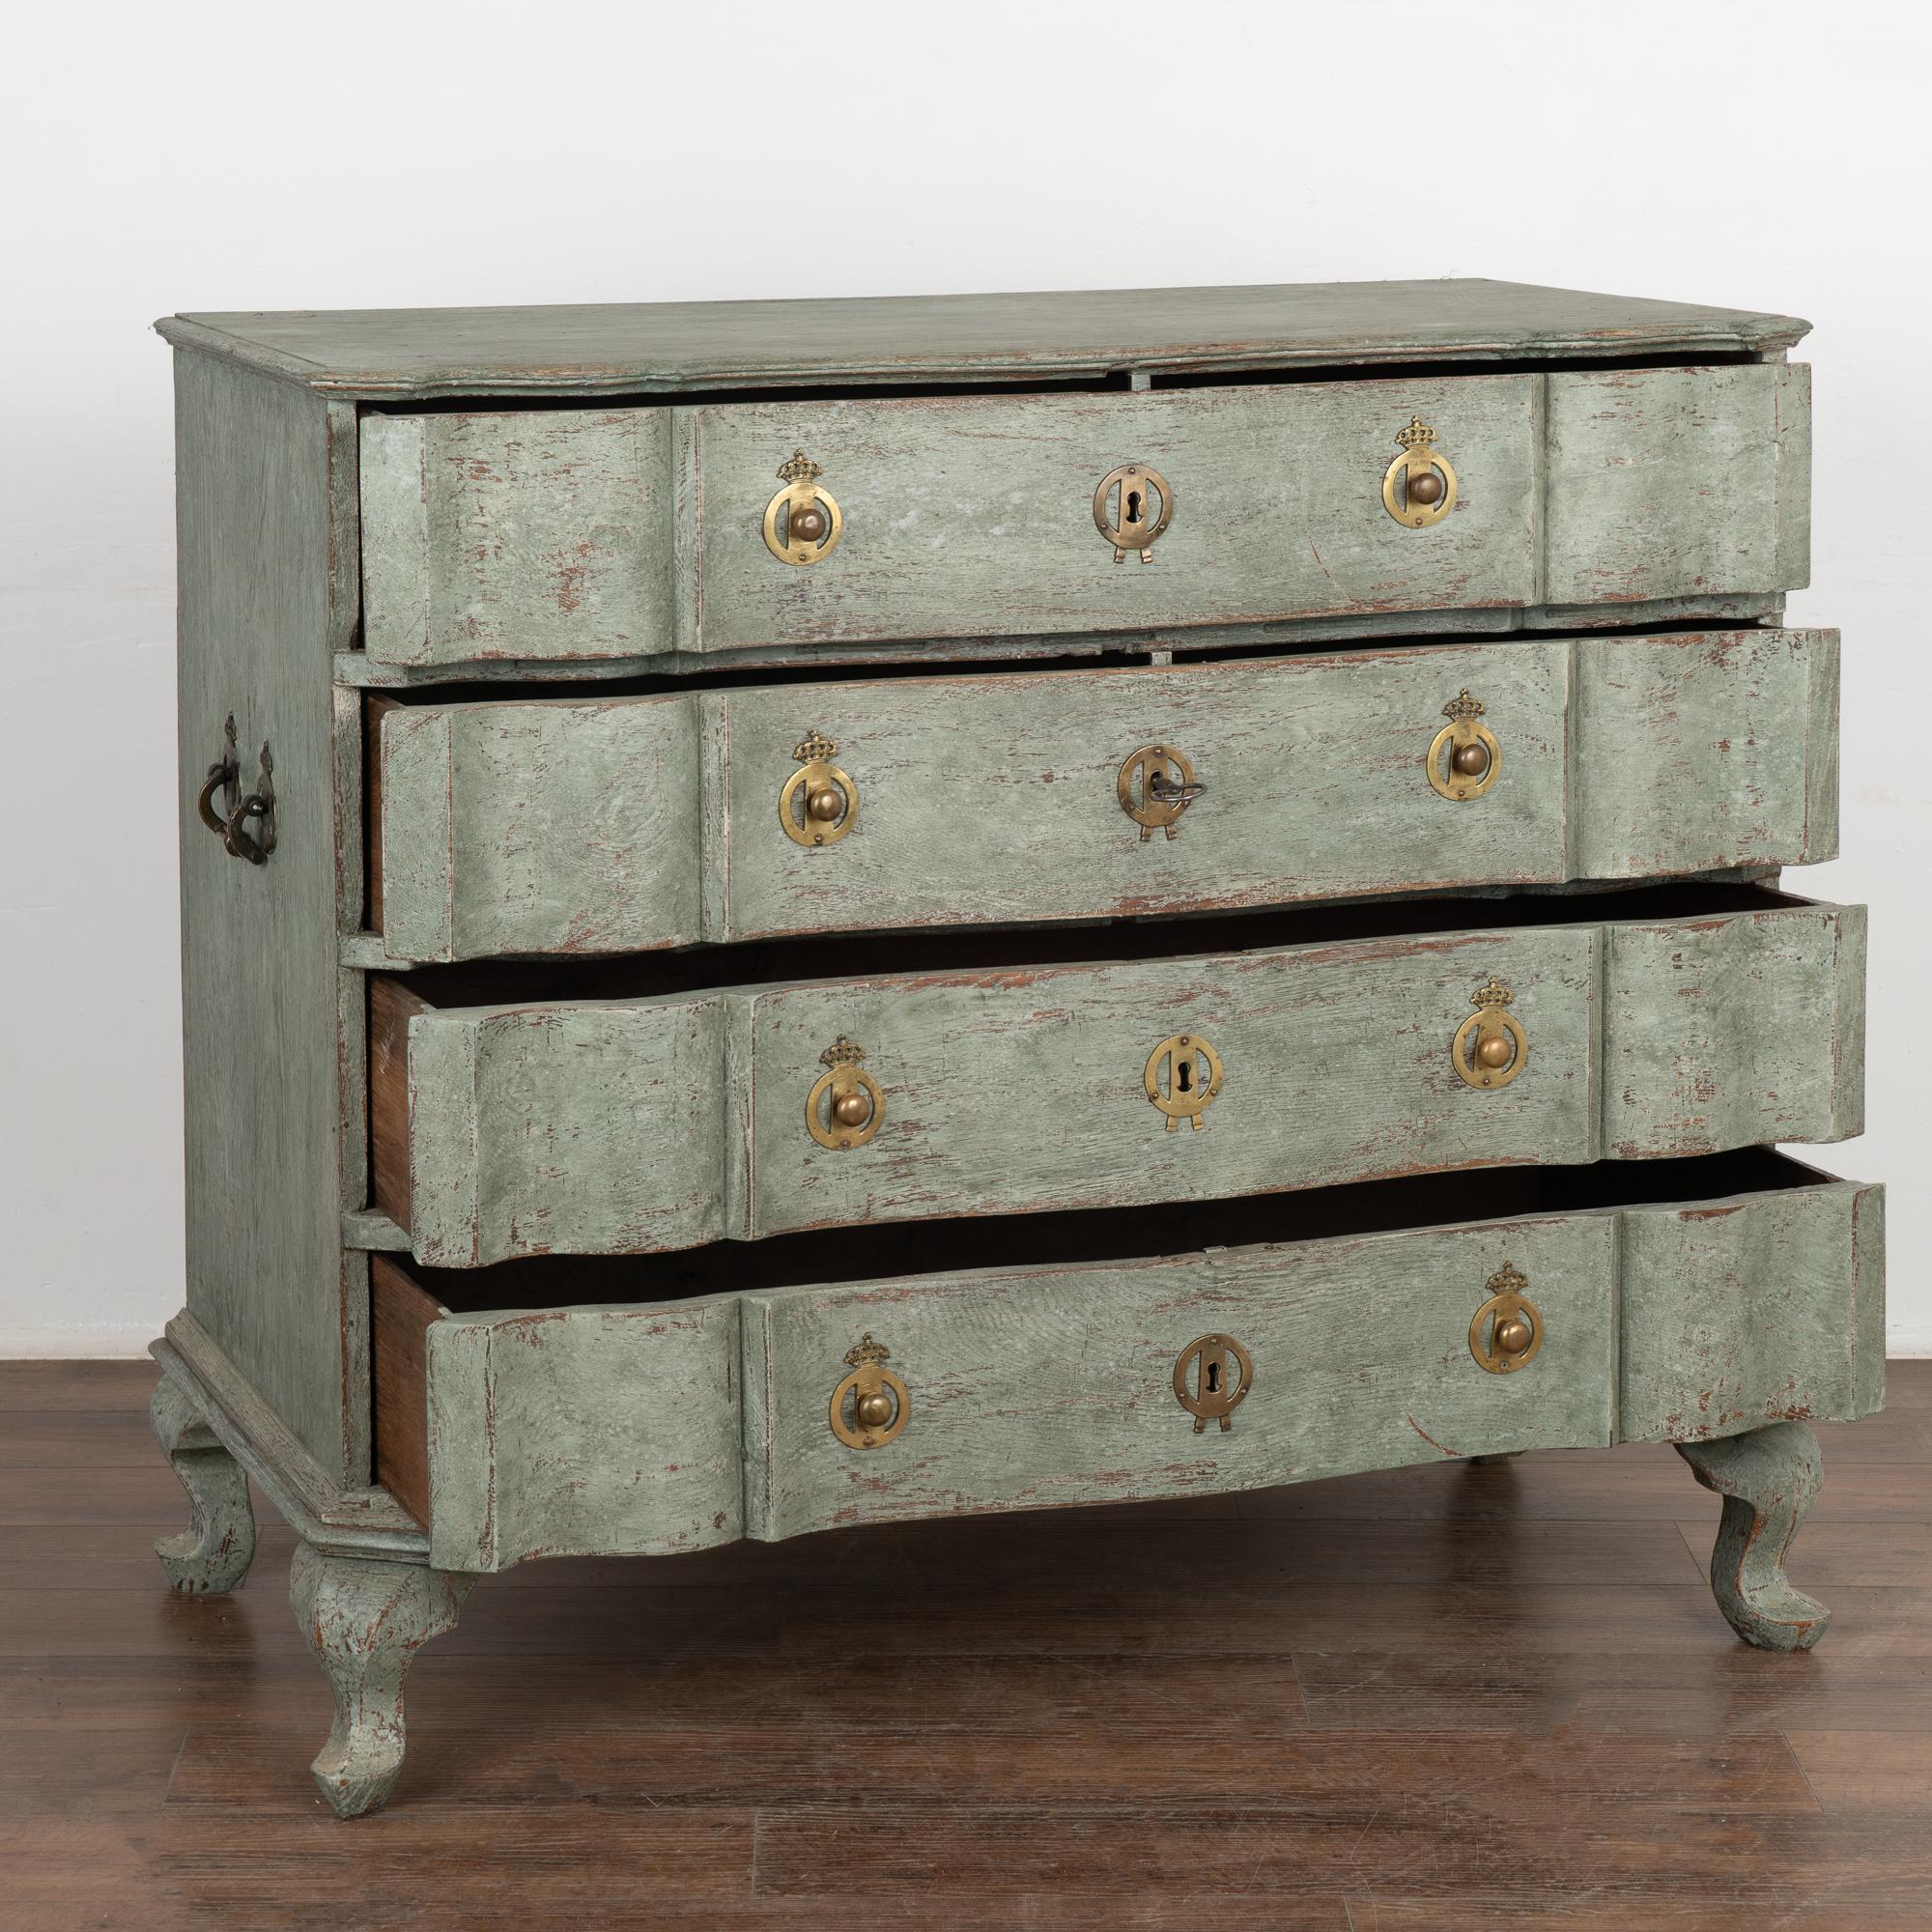 Danish Large Green Painted Oak Rococo Chest of Four Drawers, Denmark circa 1770